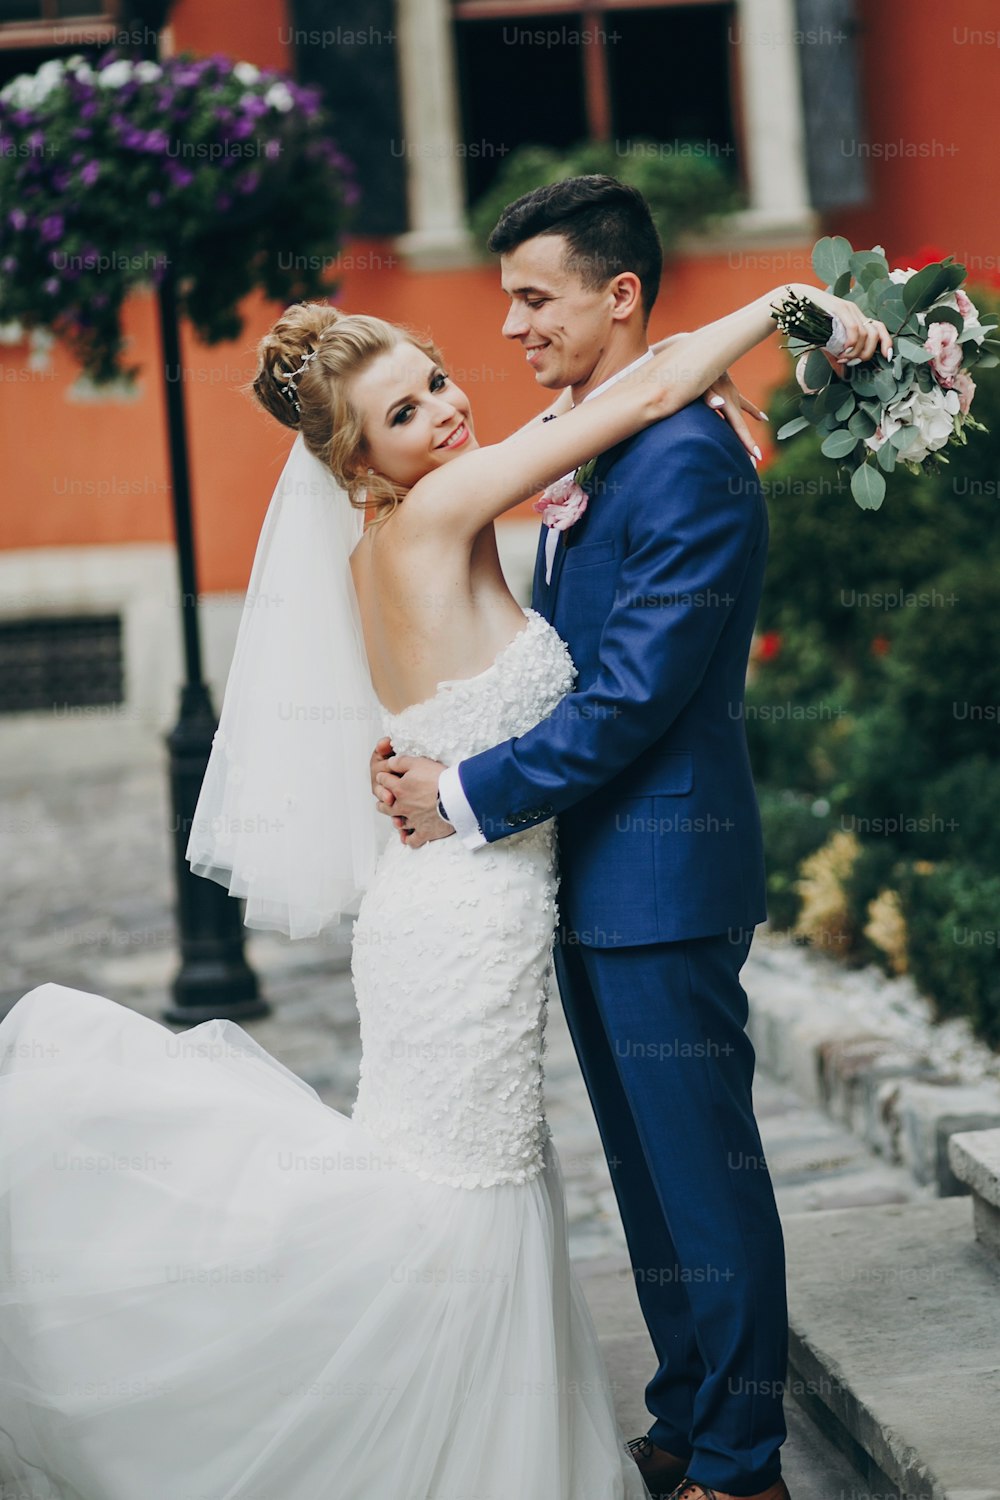 Stylish bride and groom posing and smiling in sunny european city street. Gorgeous wedding couple of newlyweds embracing at old buildings. Romantic moment